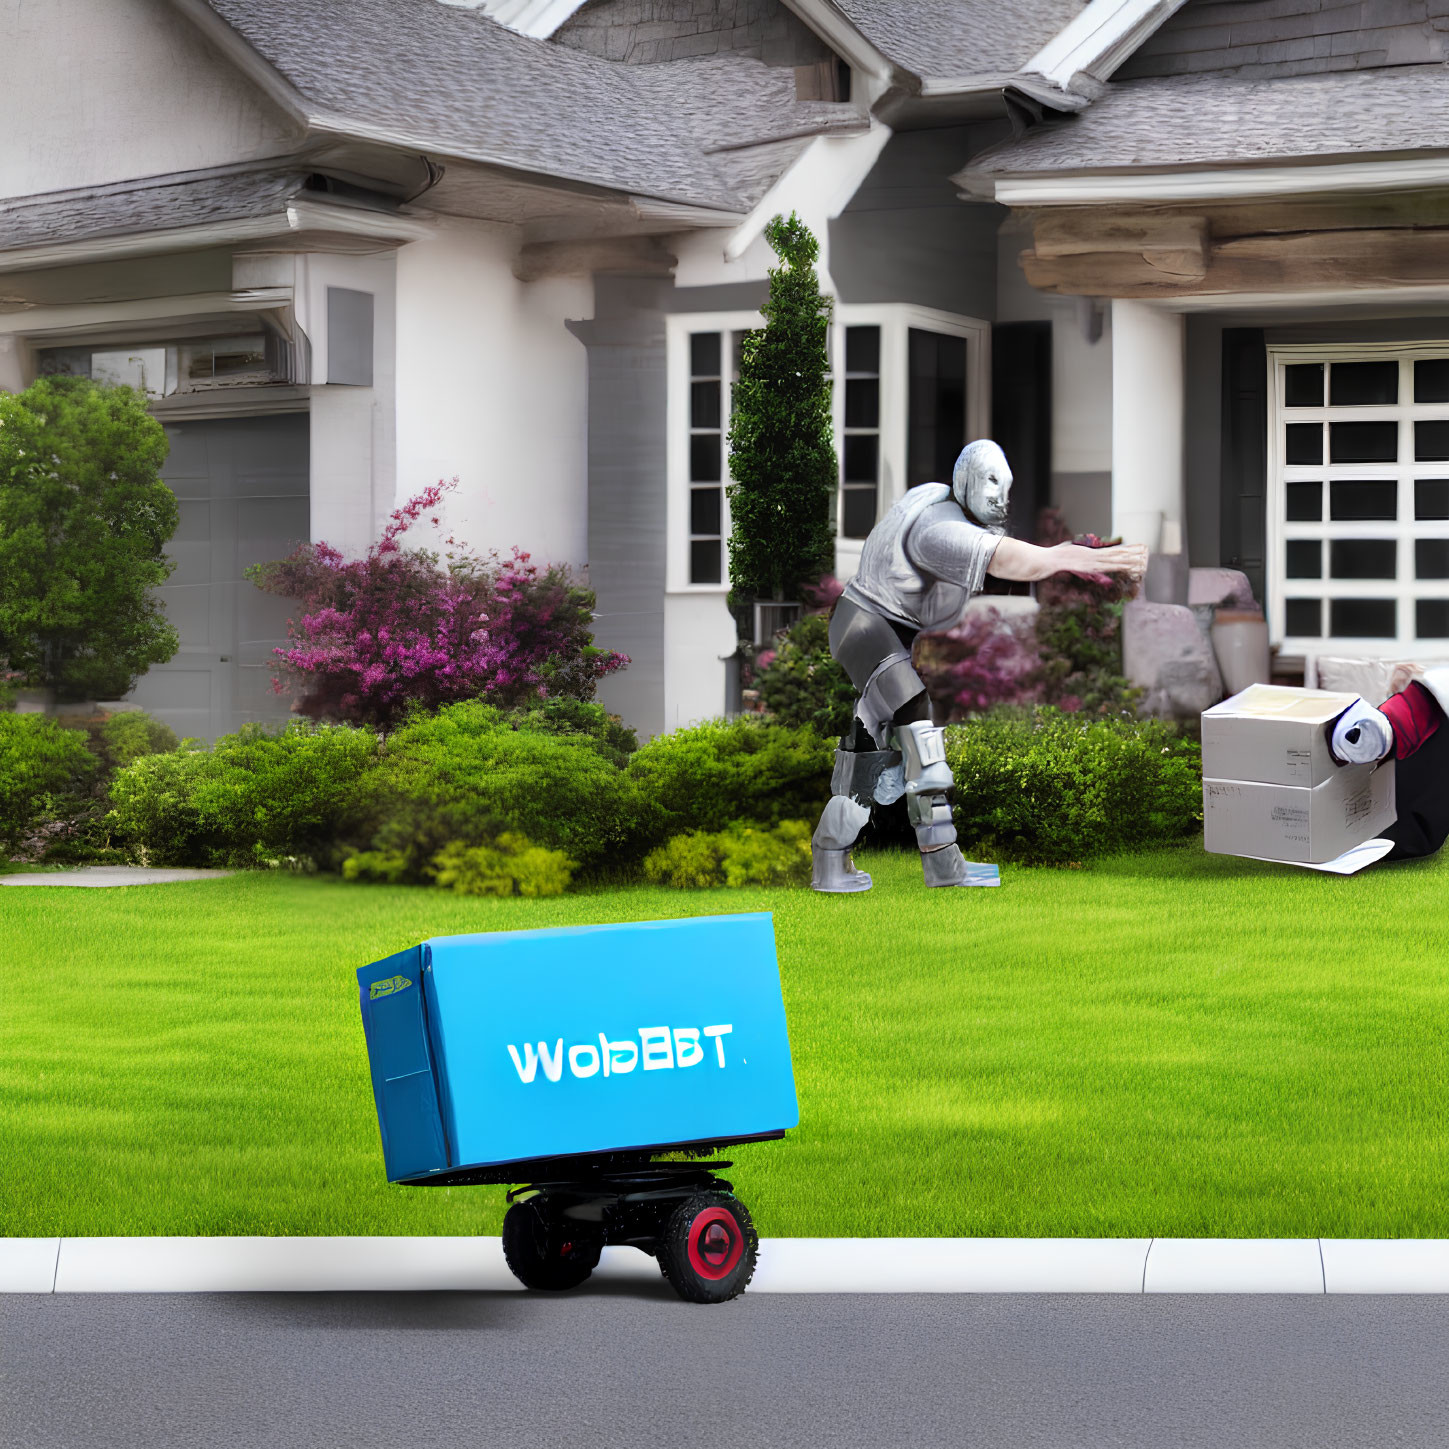 Humanoid robot delivering large blue "WobET" package in front of residential home